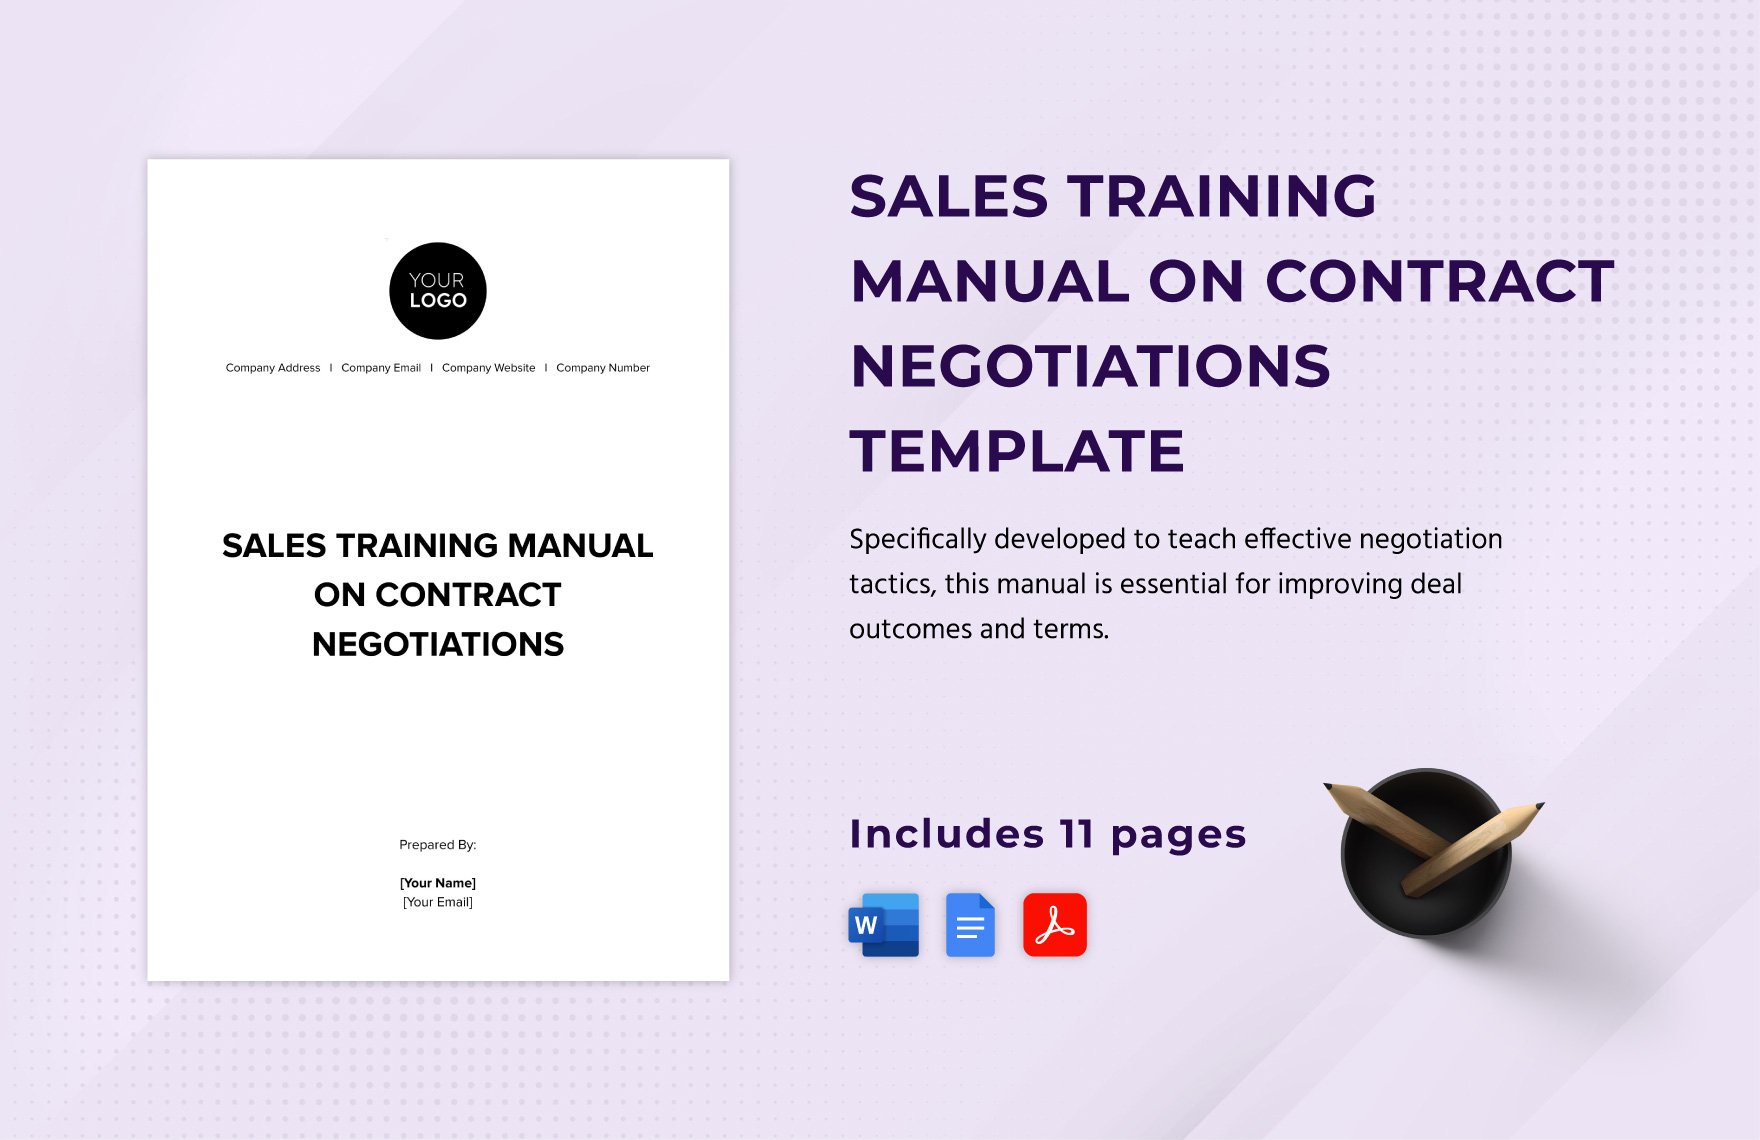 Sales Training Manual on Contract Negotiations Template in Word, Google Docs, PDF